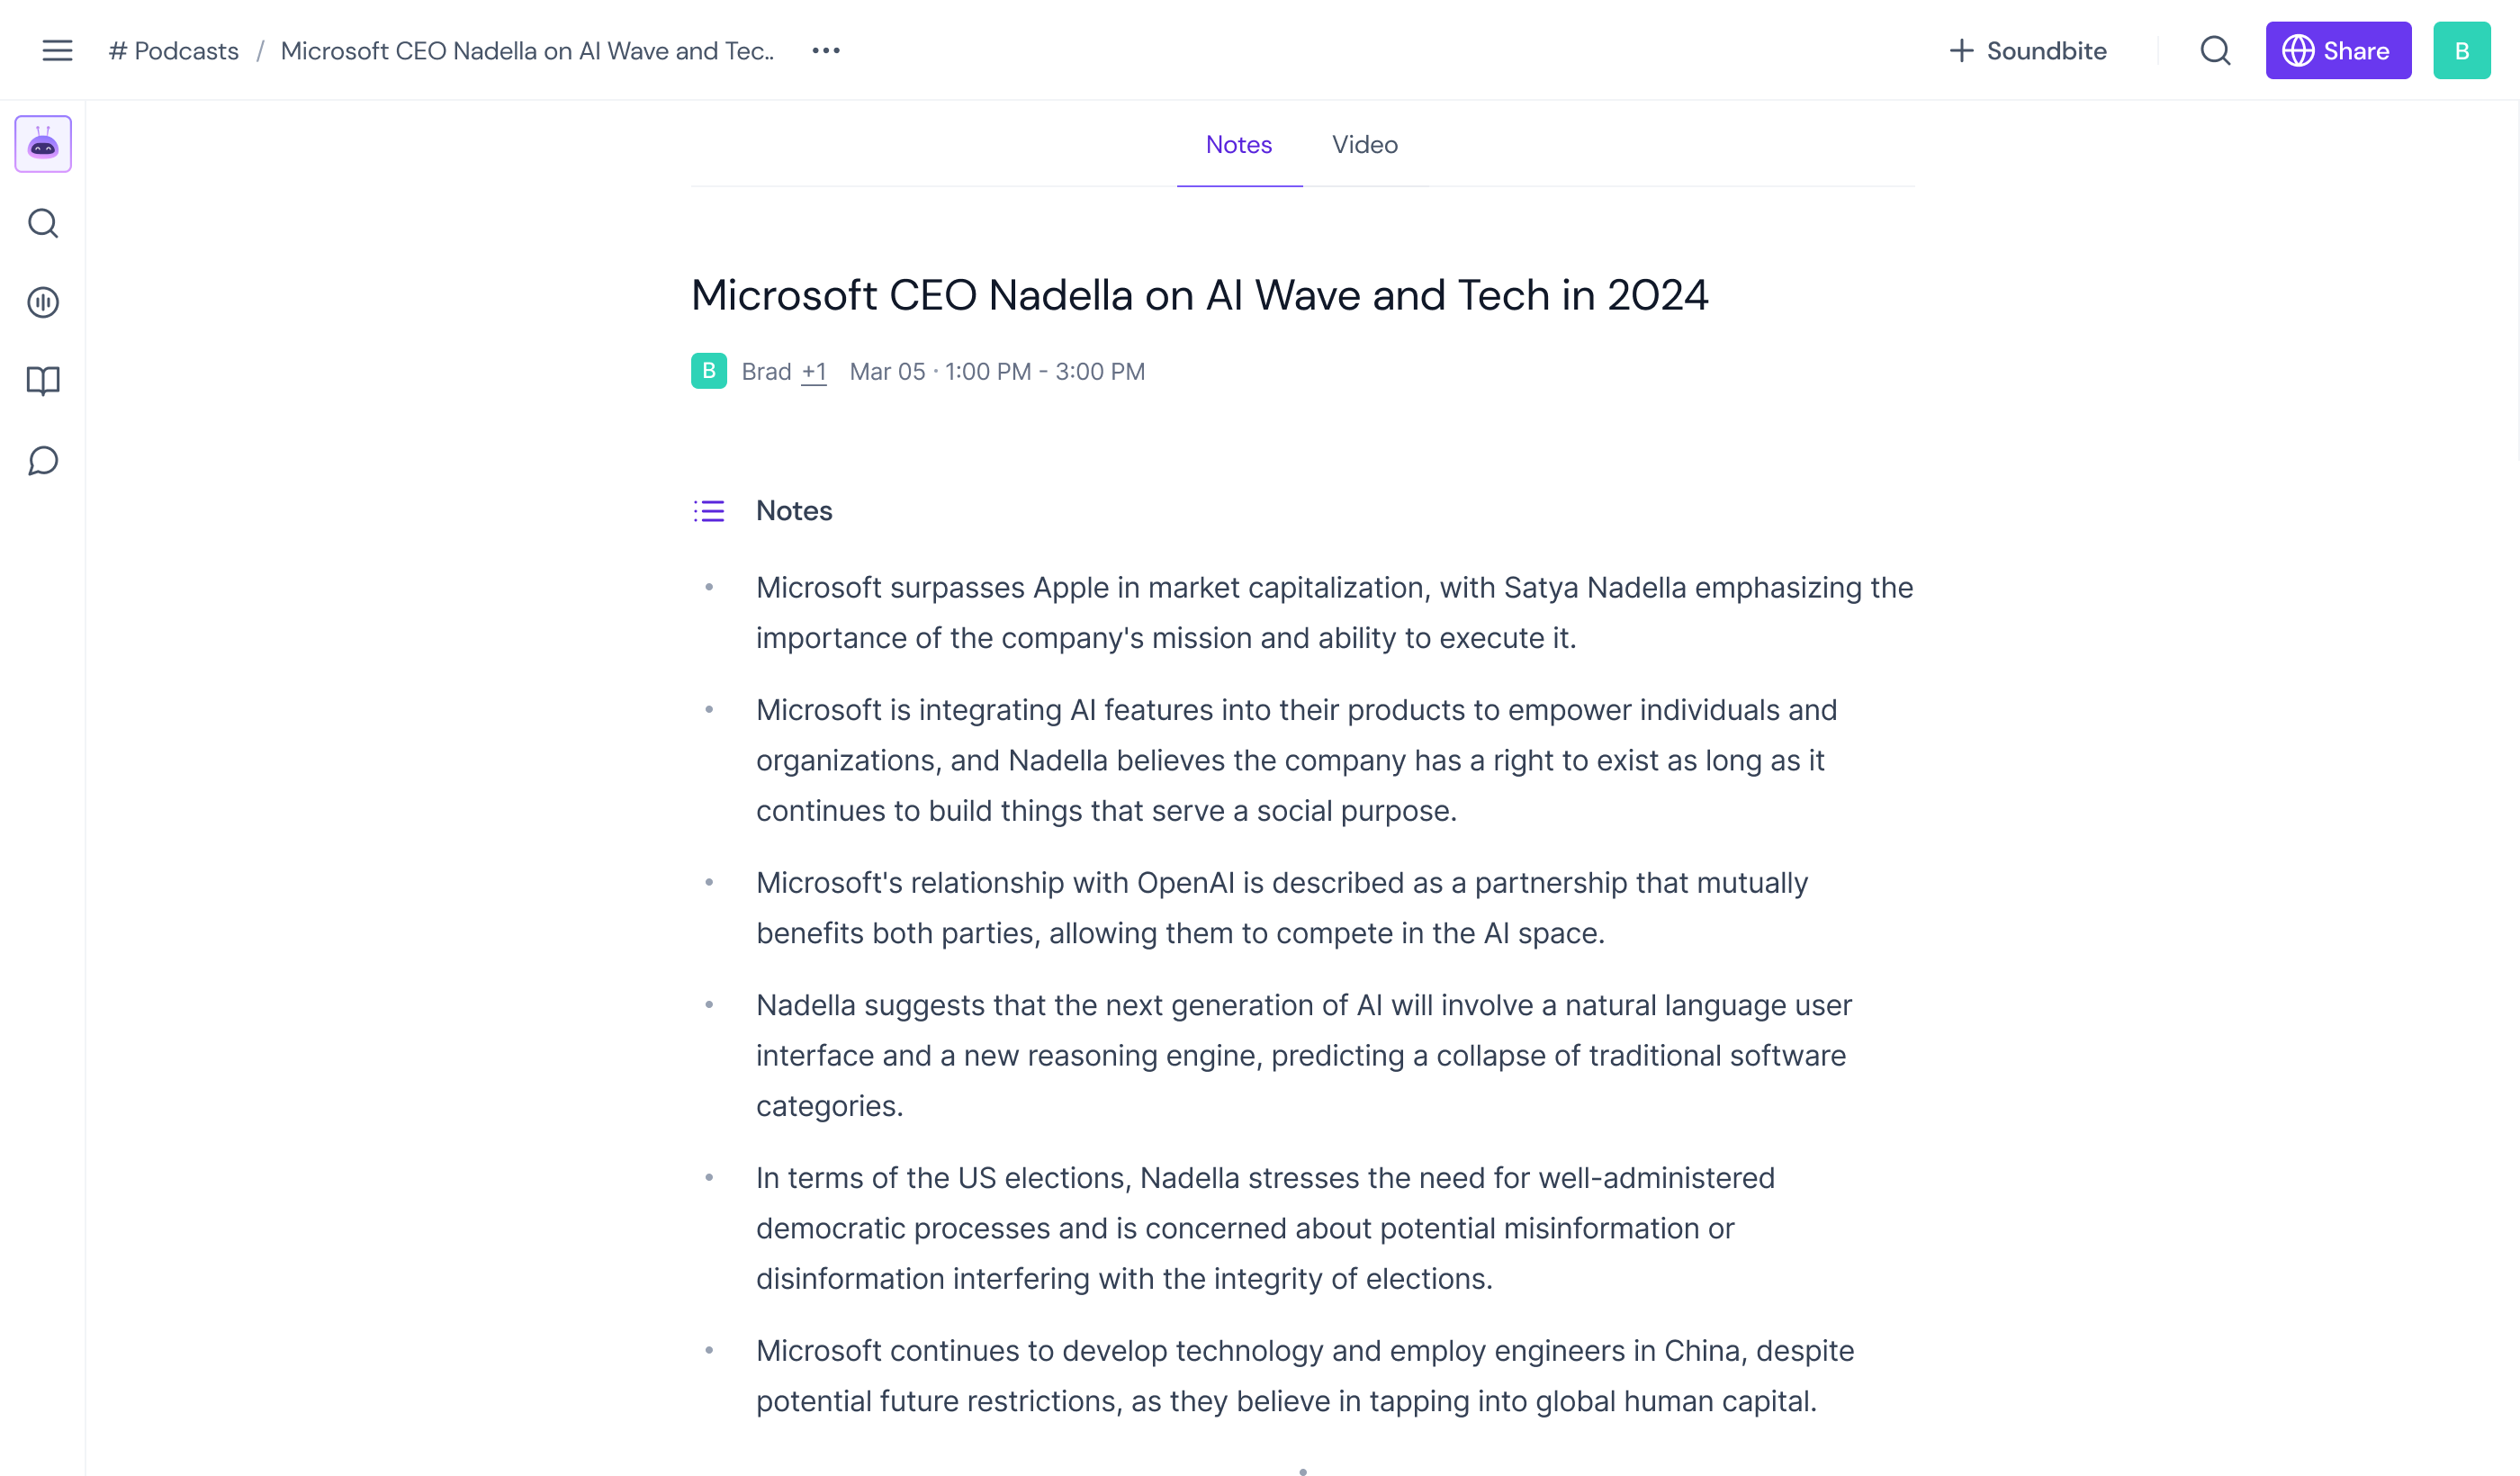 Bloomberg Talks: Microsoft CEO Nadella on AI Wave and Tech in 2024: Conversation Summary